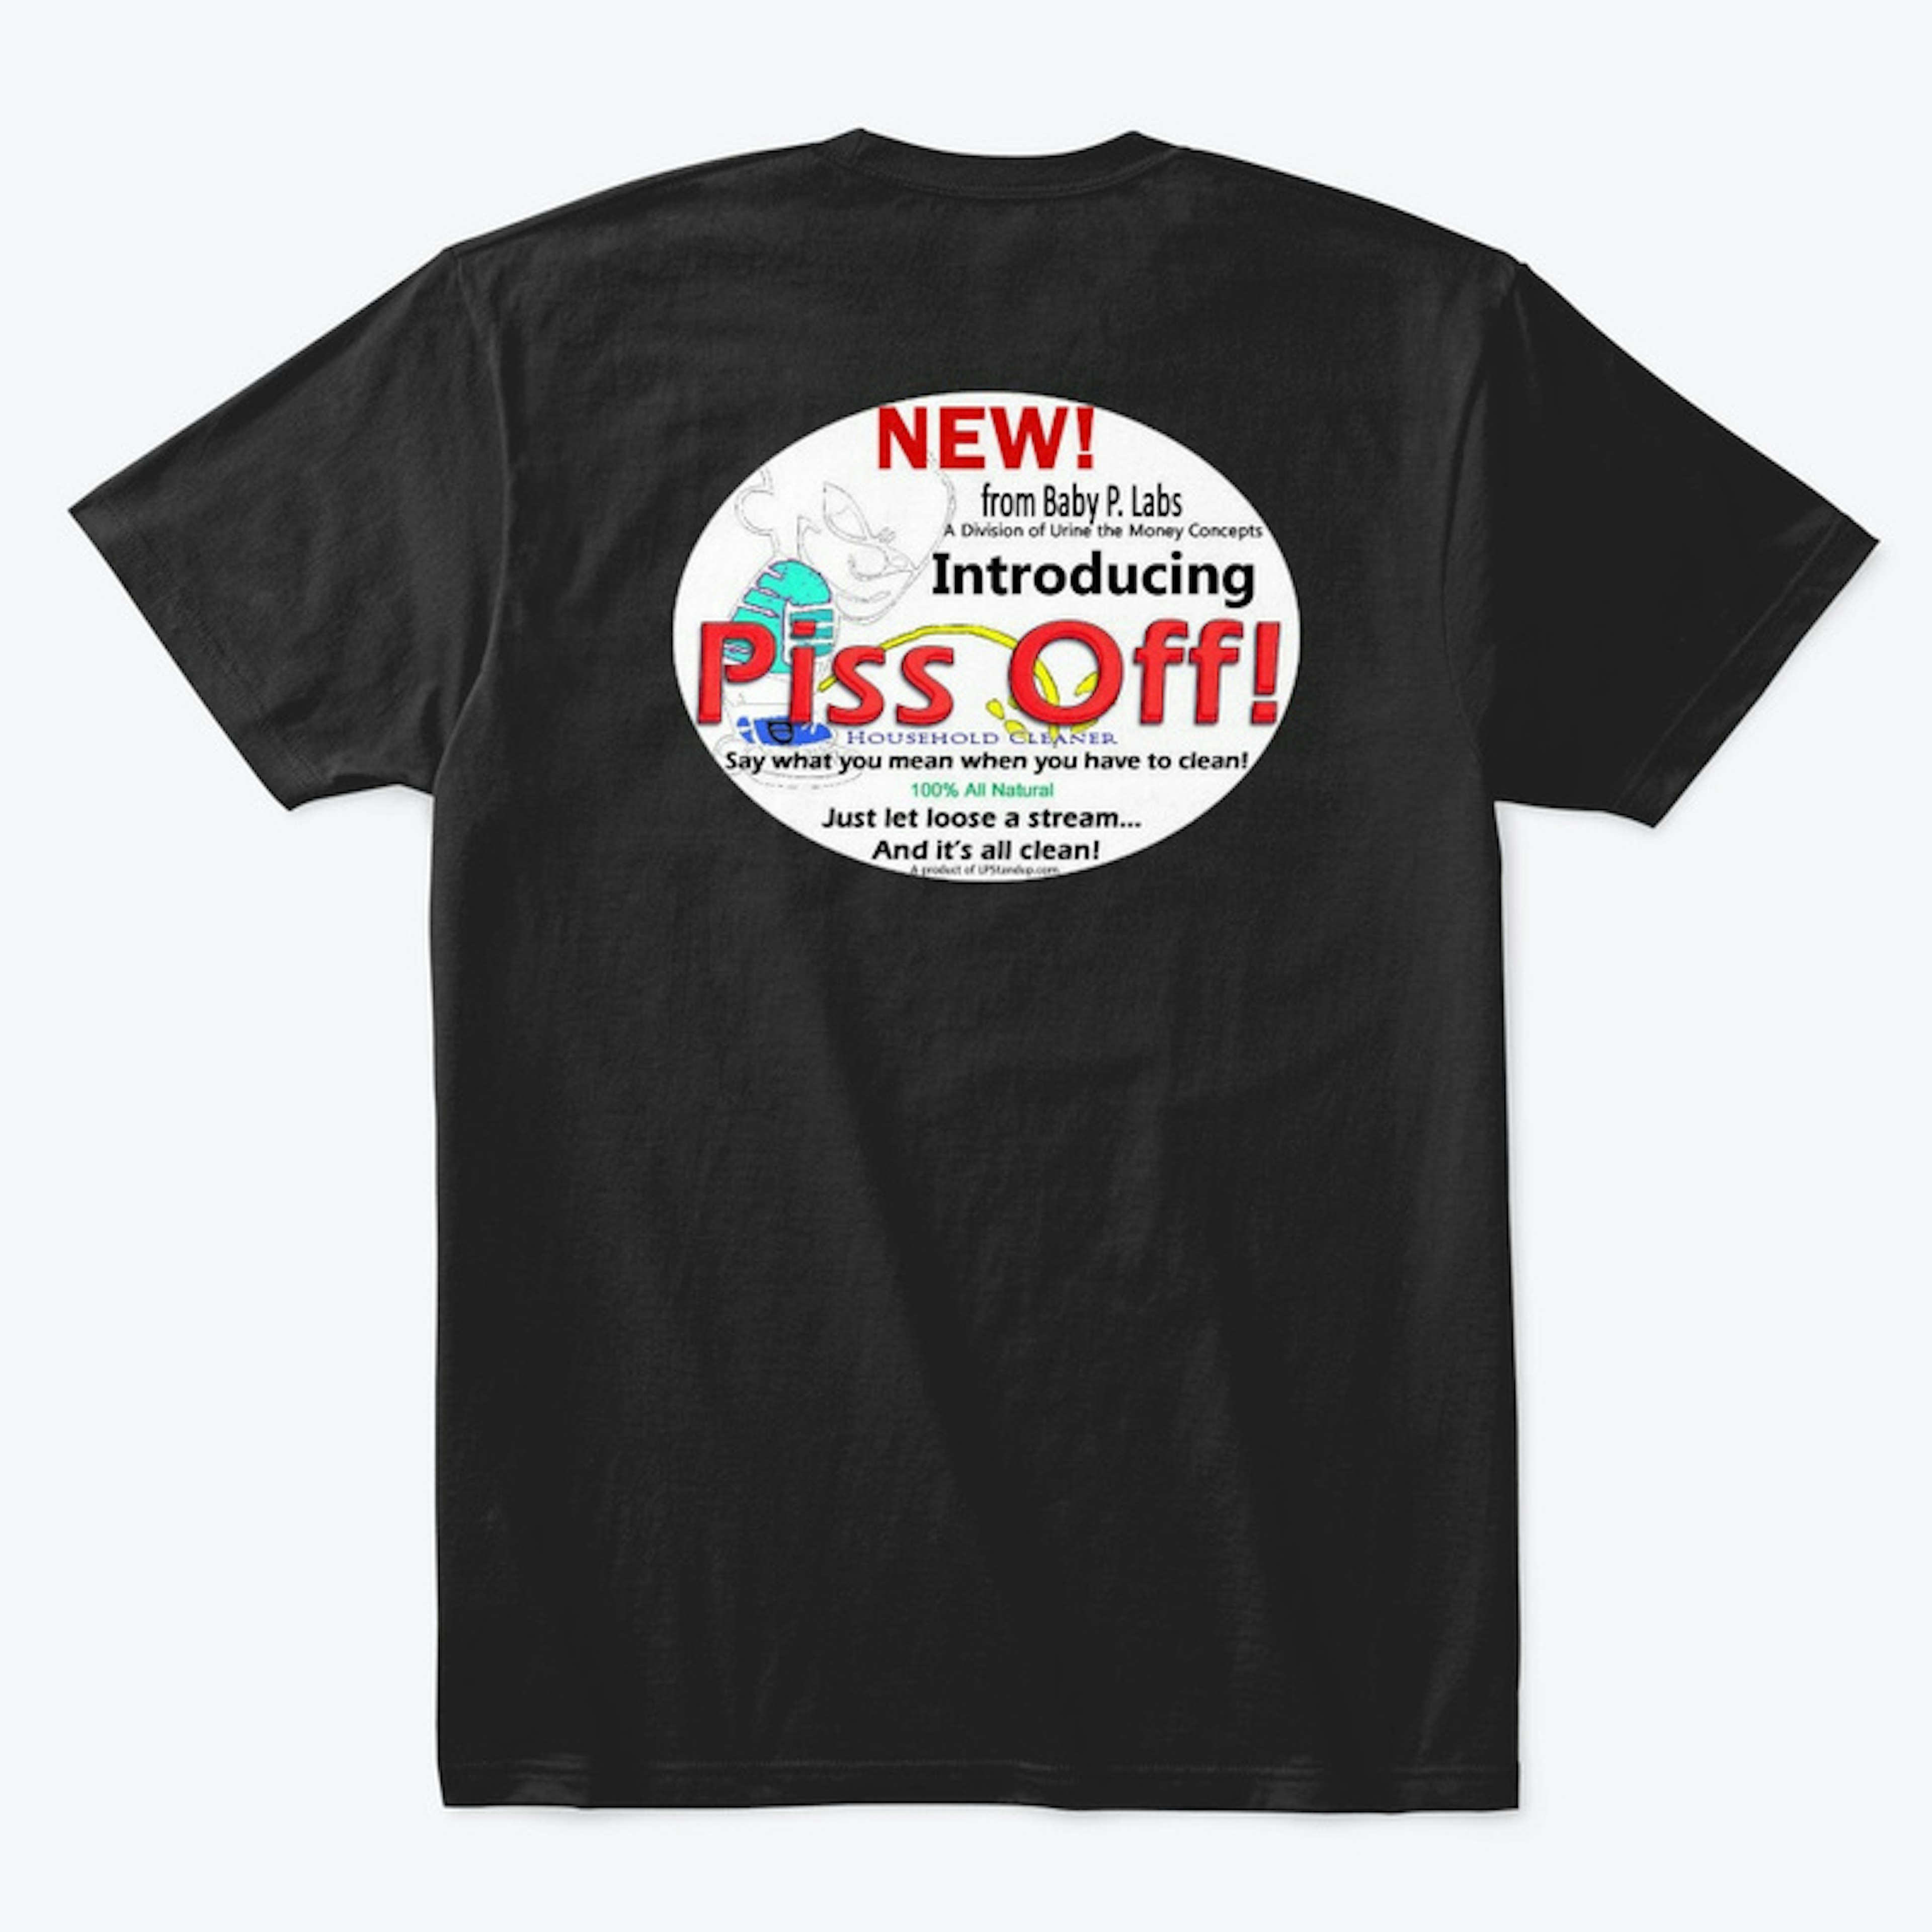 Stand-Up Comic LP's "Piss-Off!" T-shirt